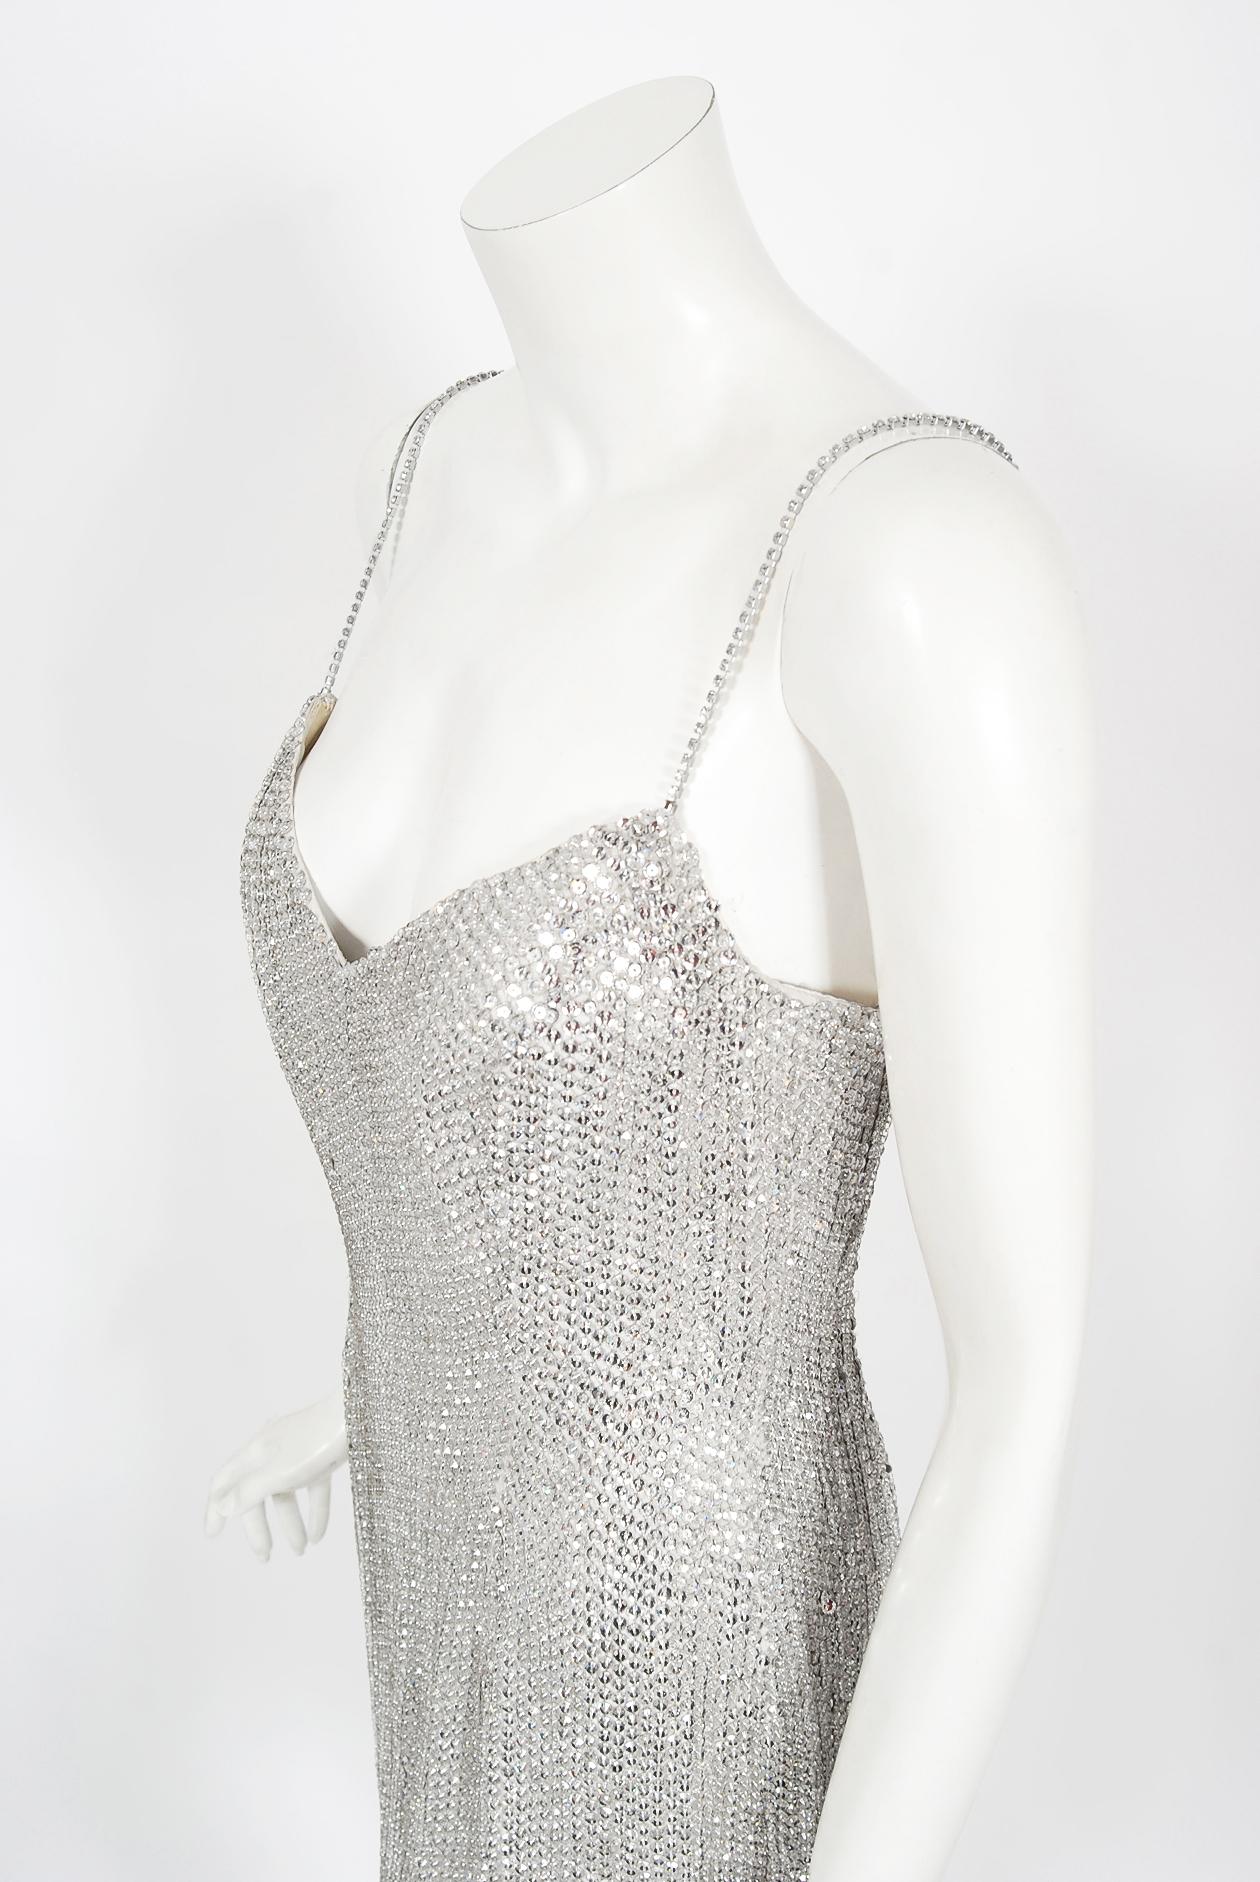 1990 Michael Kors Documented Madonna Beaded Silver Rhinestone Mini Slip Dress In Good Condition For Sale In Beverly Hills, CA